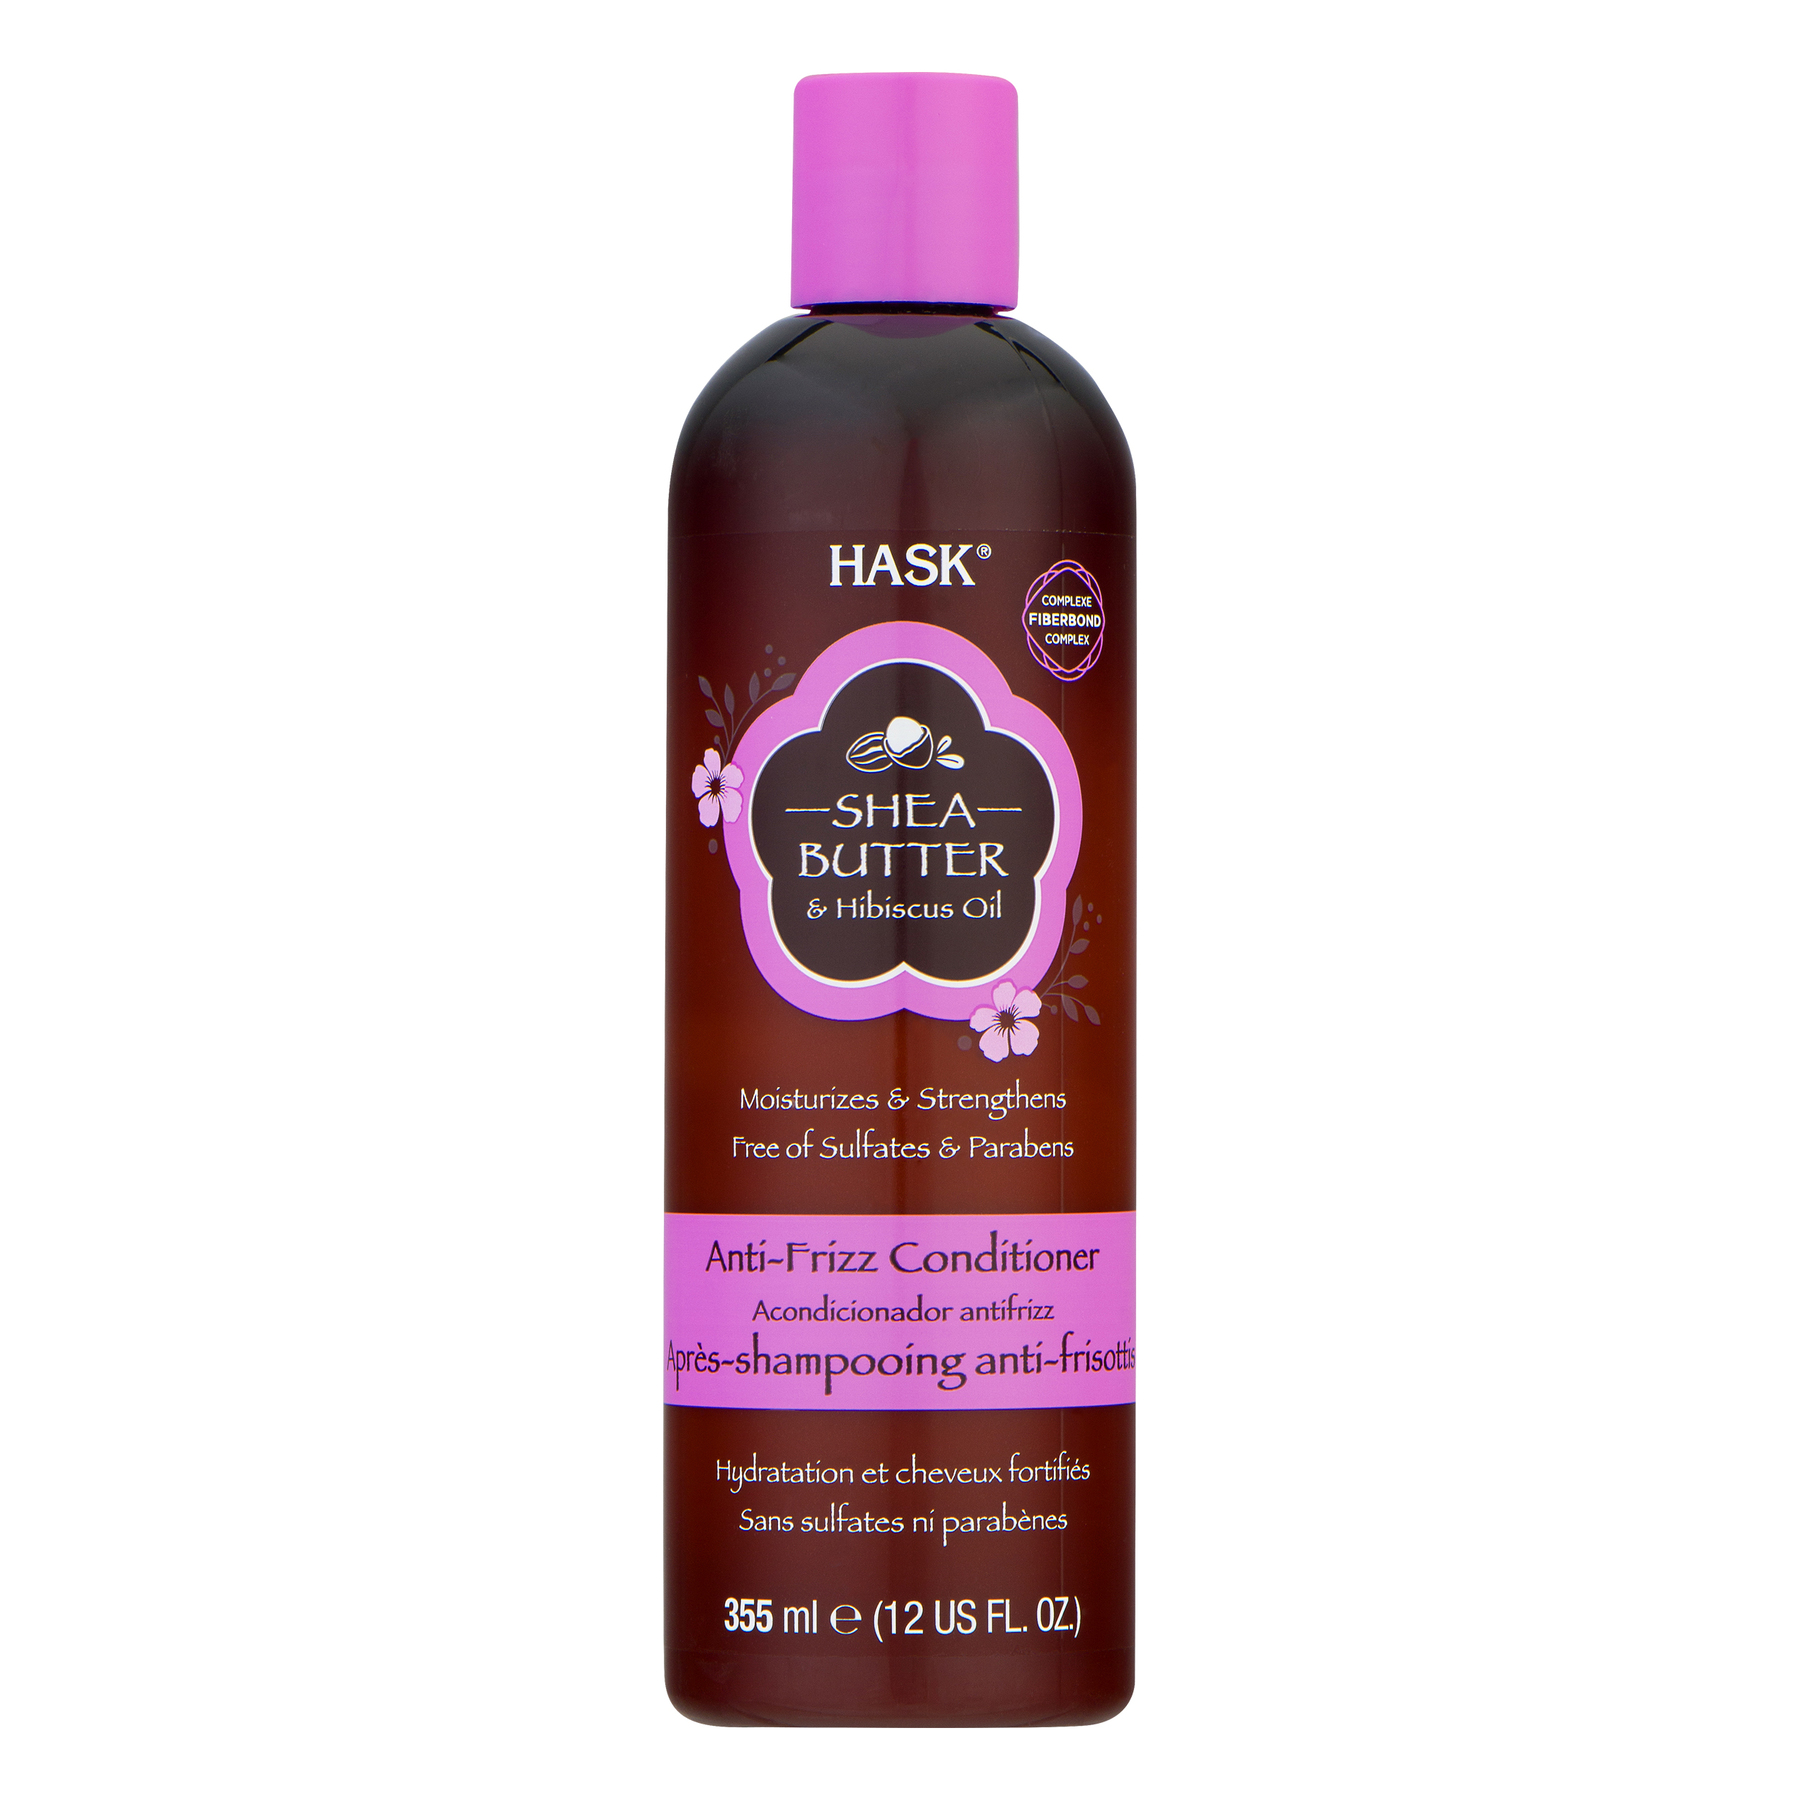 HASK Anti-Frizz Conditioner Sulfate Free Shea Butter and Hibiscus Oil, 12 fl oz - image 1 of 11